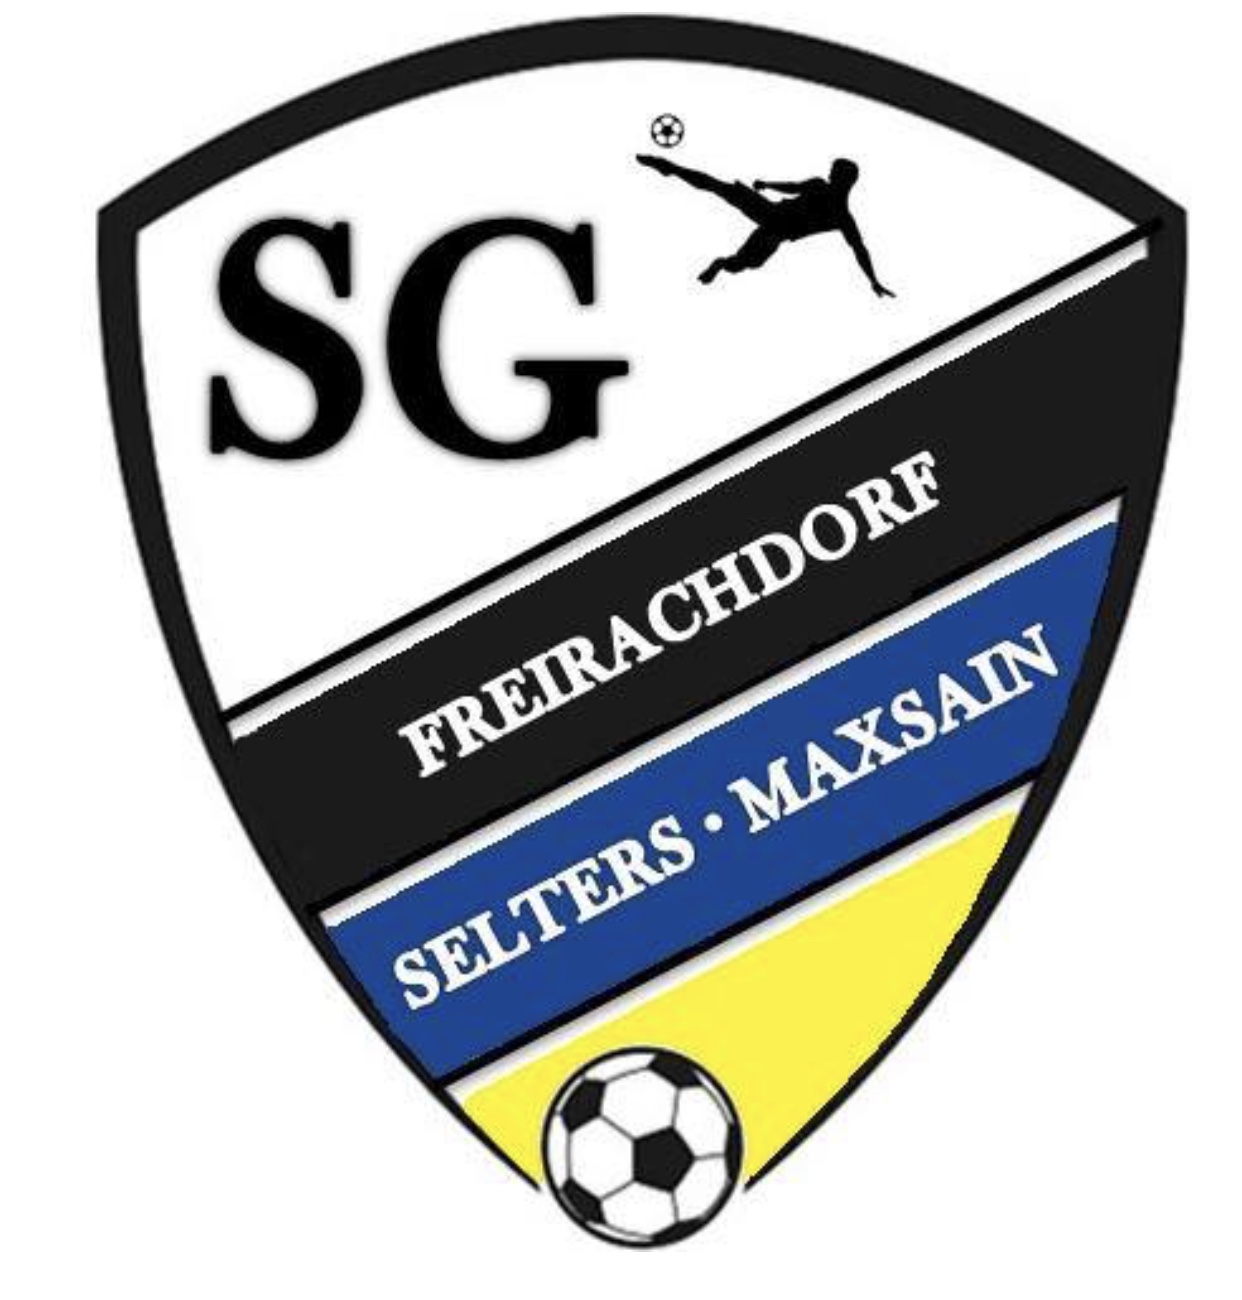 You are currently viewing FC Kosova Montabaur ll 1:2 SG Selters/Freirachdorf/Maxsain